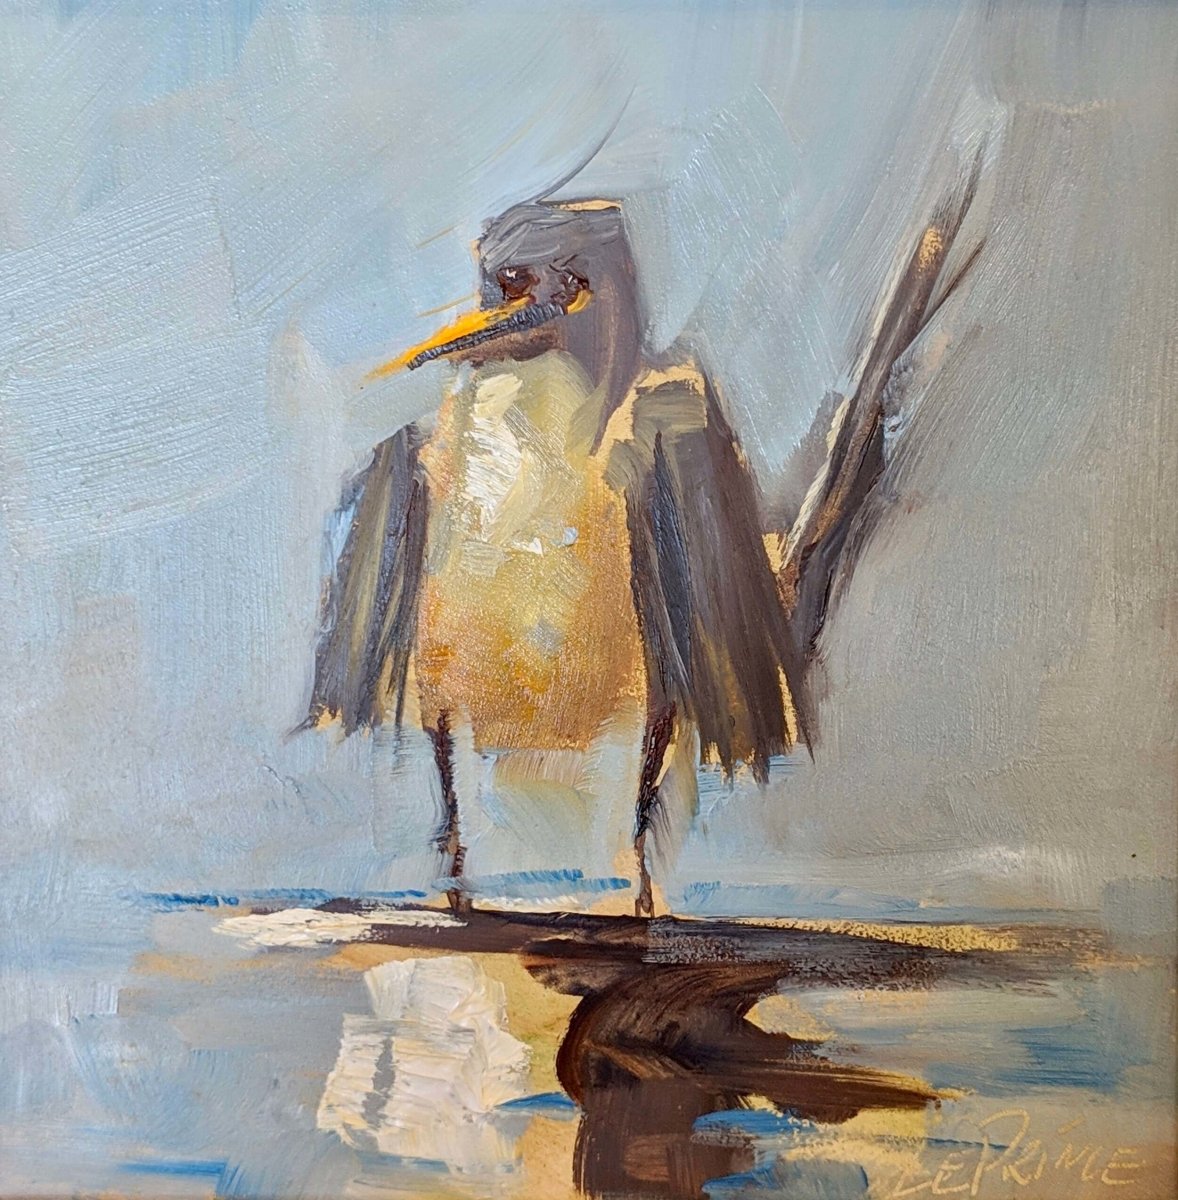 Bird Study II by Kevin LePrince at LePrince Galleries